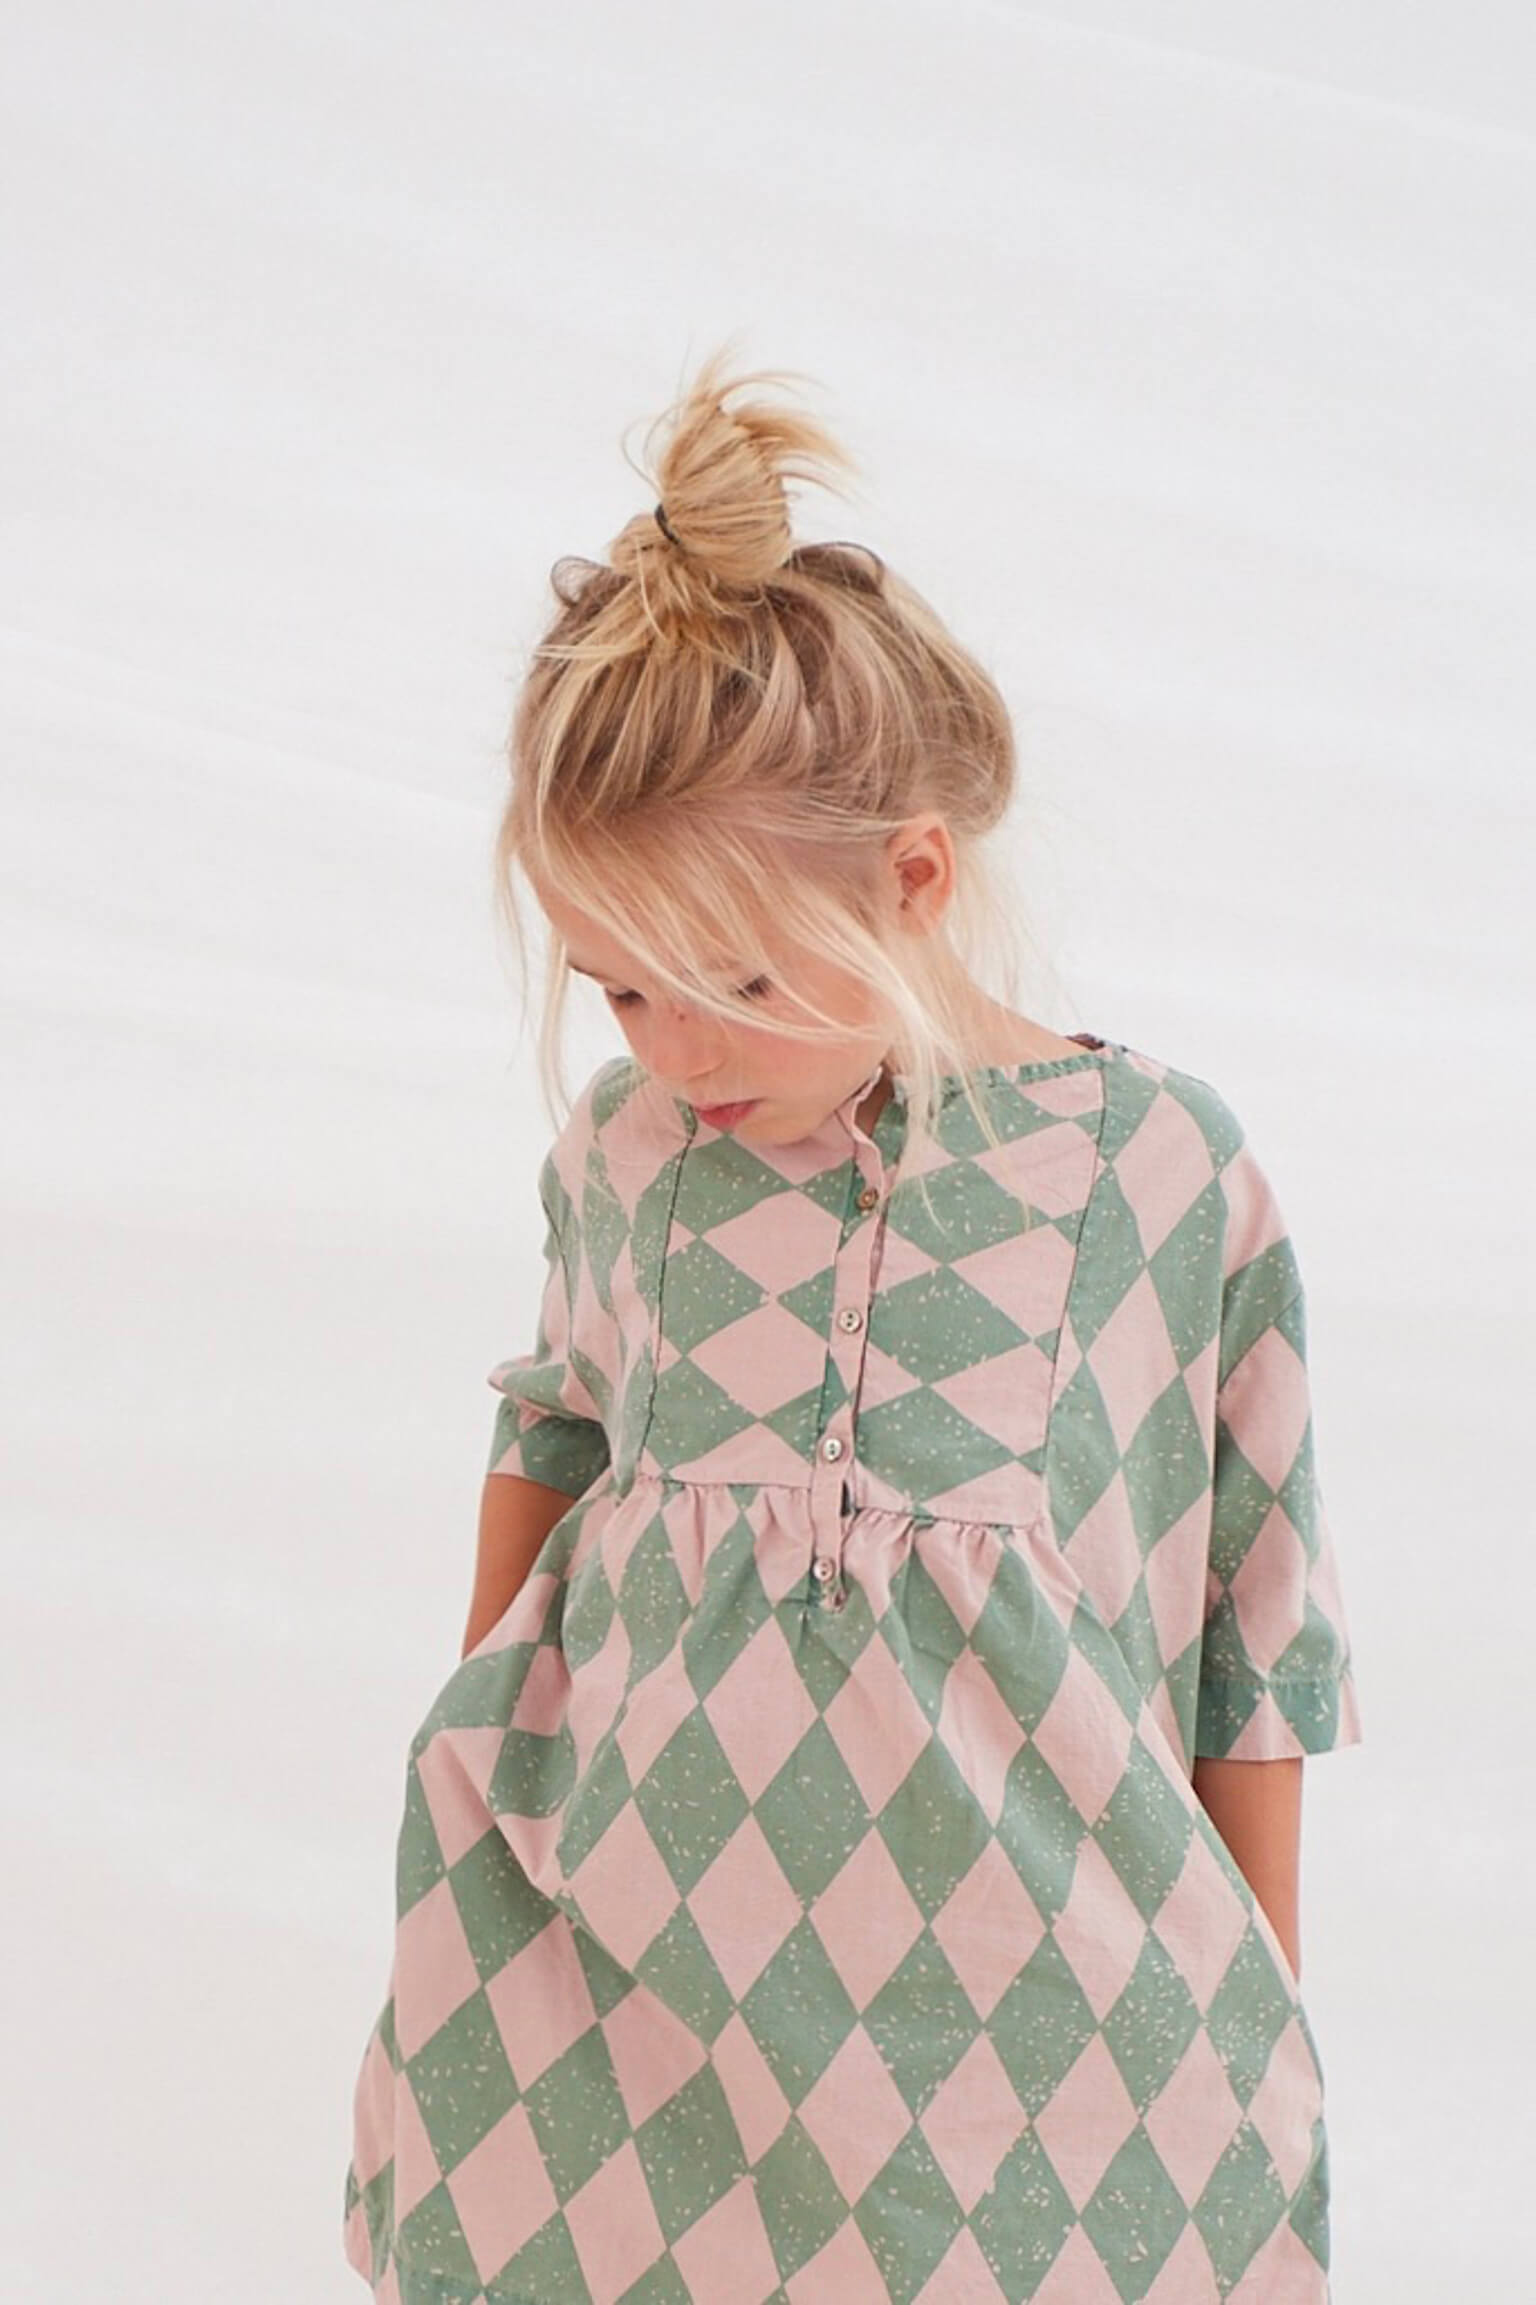 Thoughtfully and responsible-produced children's fashion longlivethequeen